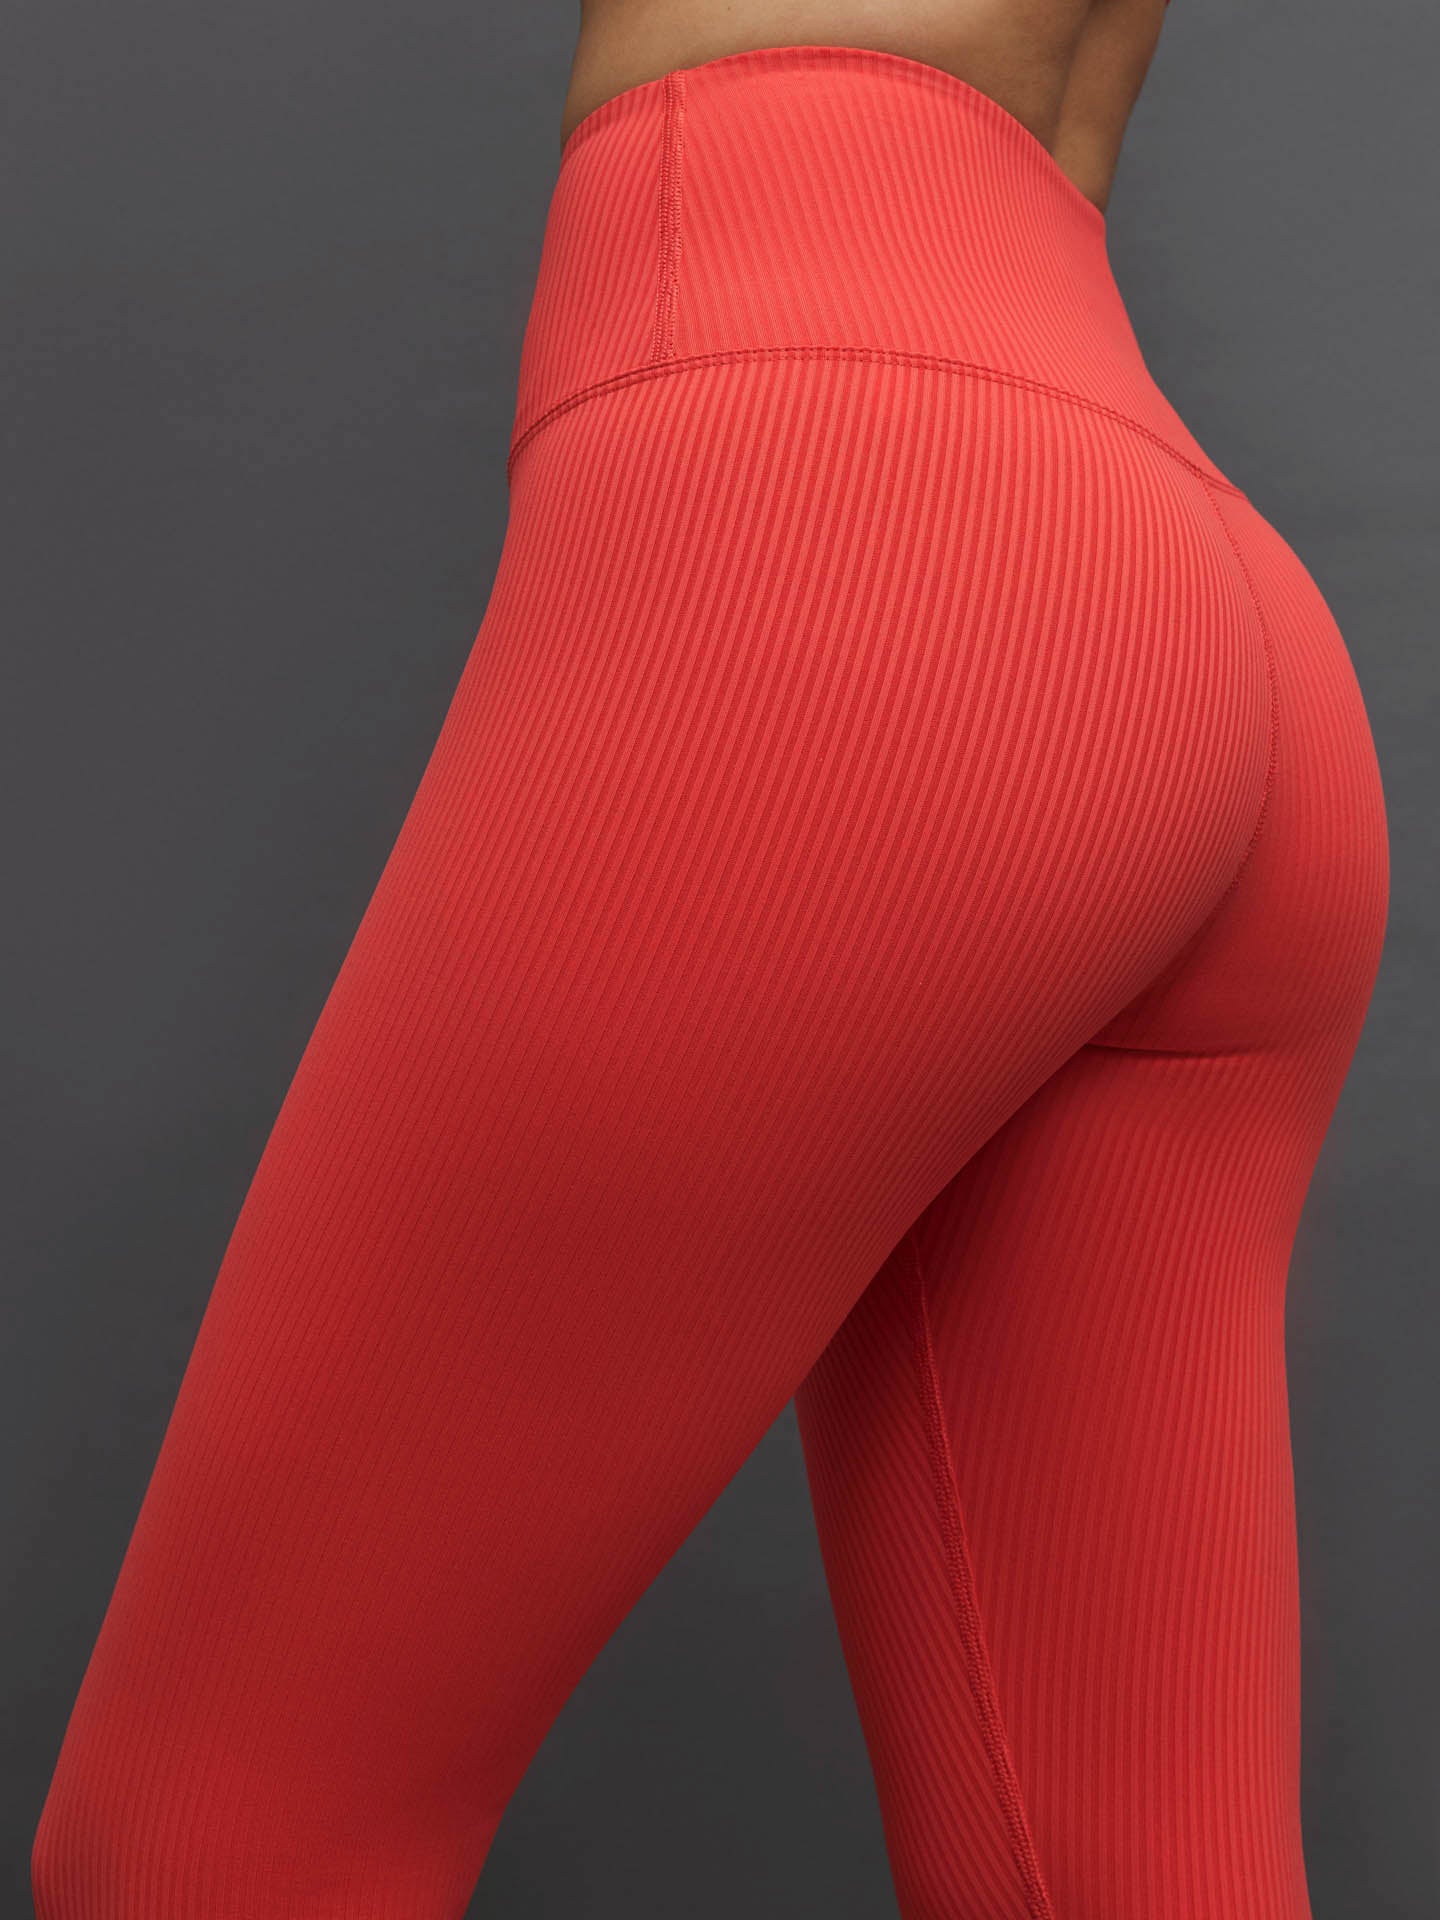 Carbon38 ribbed high waisted legging  High waisted leggings, Carbon 38,  High waisted